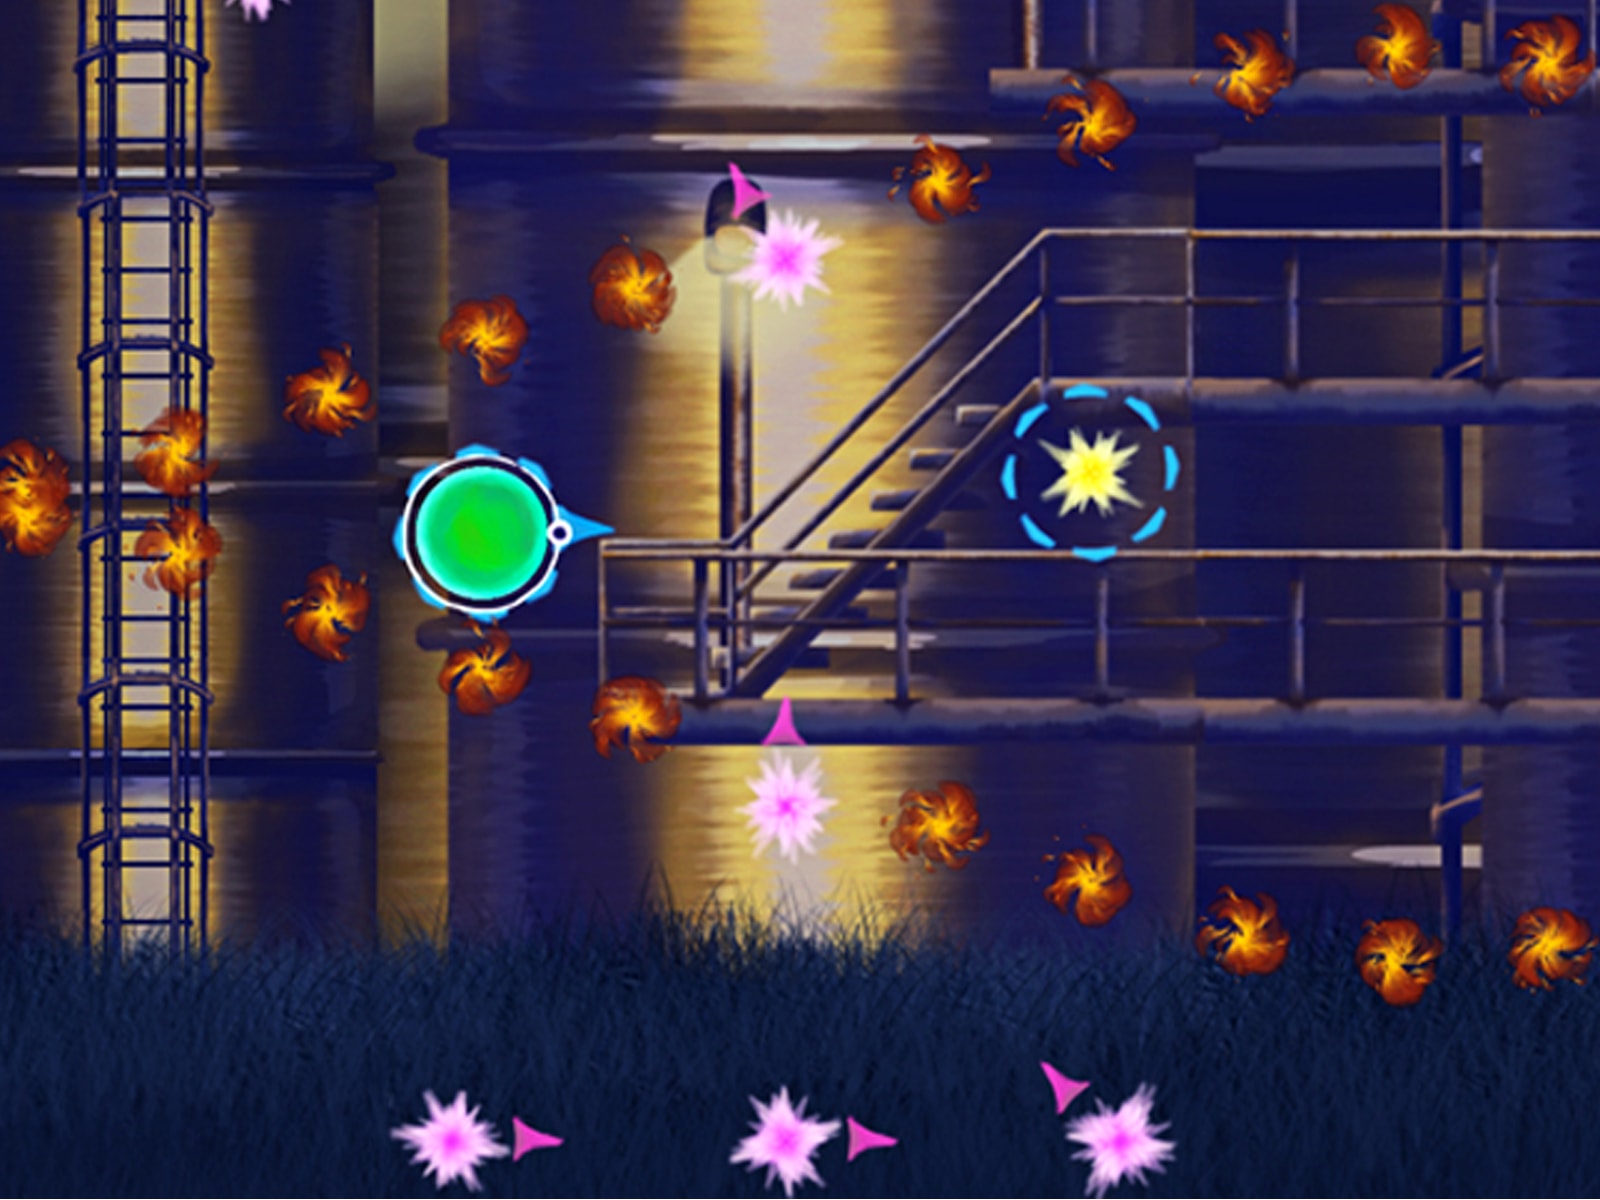 Screenshot from DigiPen student game Flickers of a sphere traveling through a darkened landscape